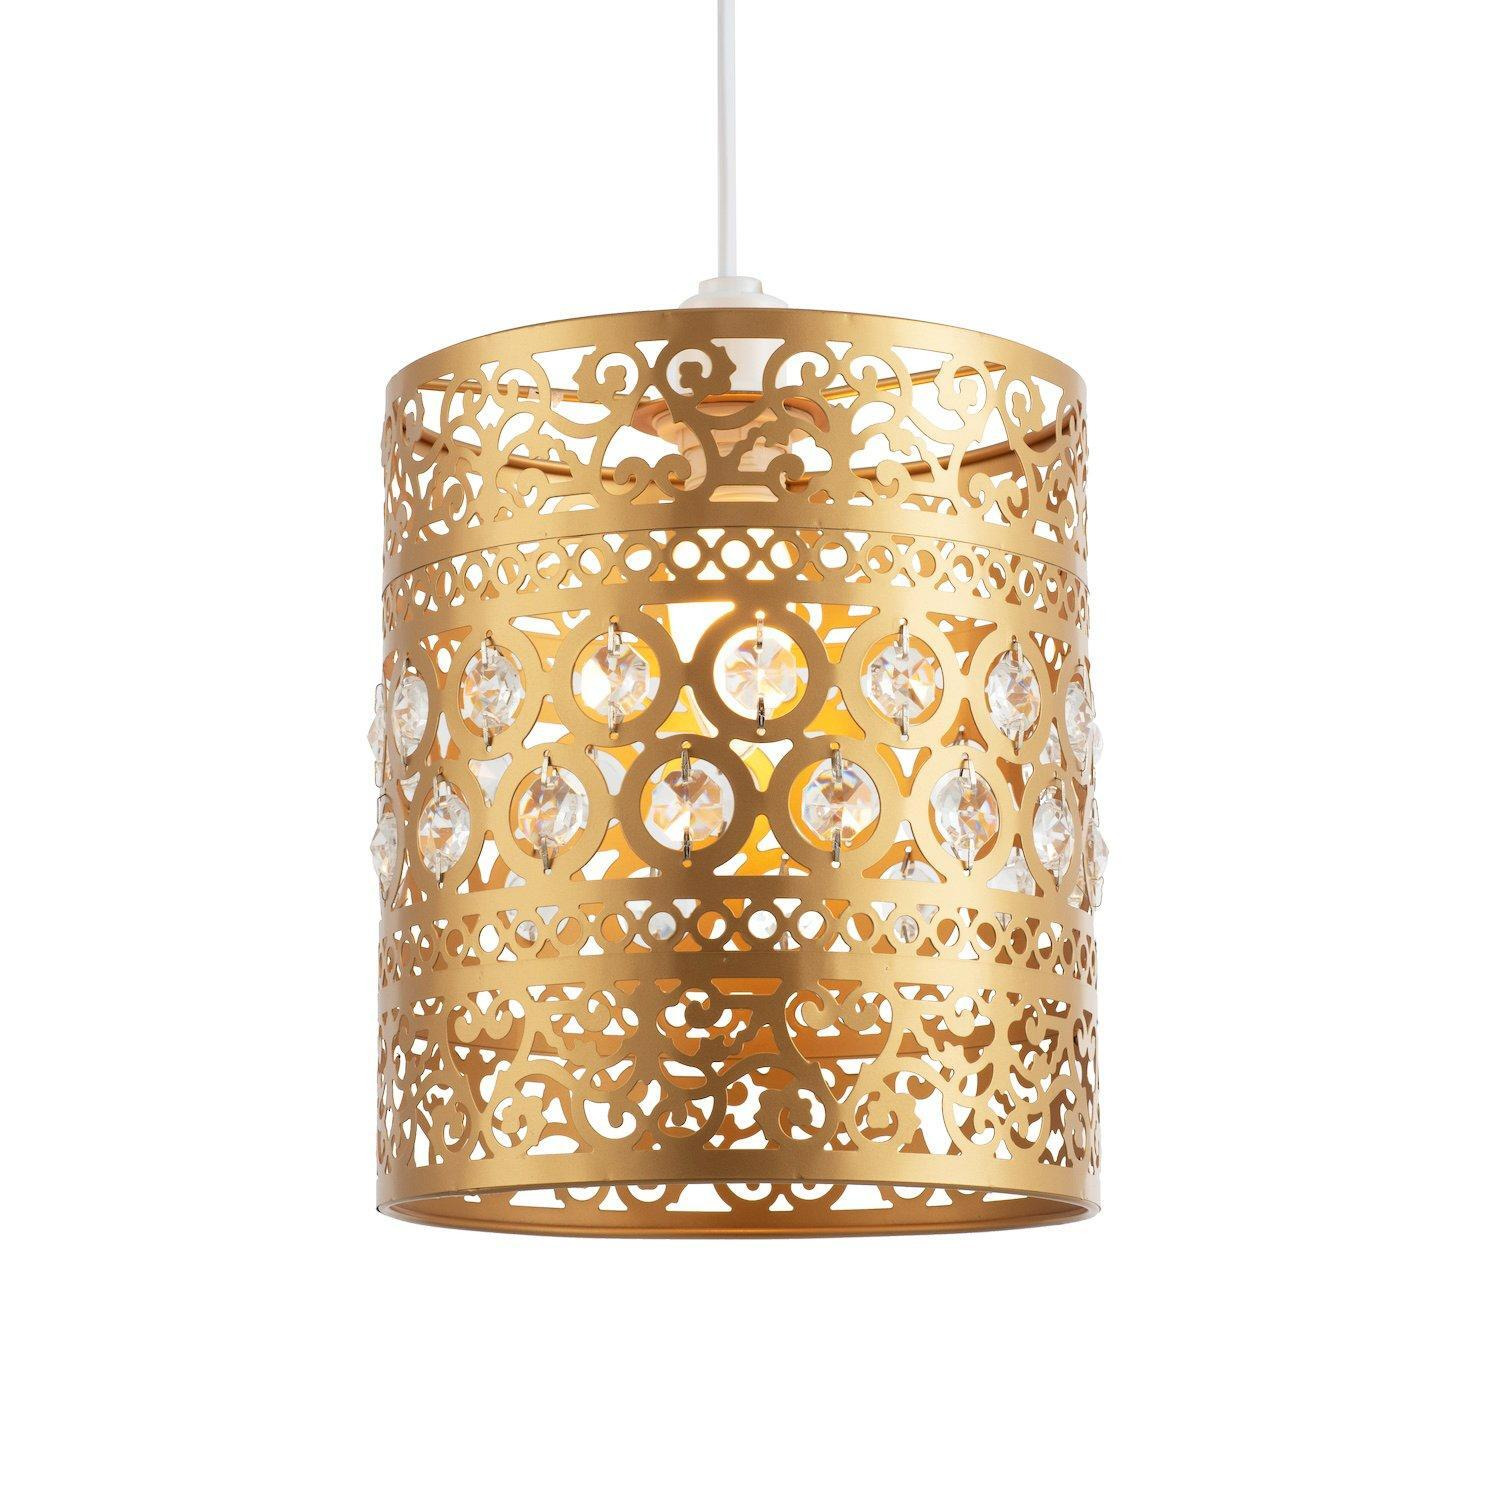 Traditional and Ornate Easy Fit Pendant Shade with Acrylic Droplets - image 1